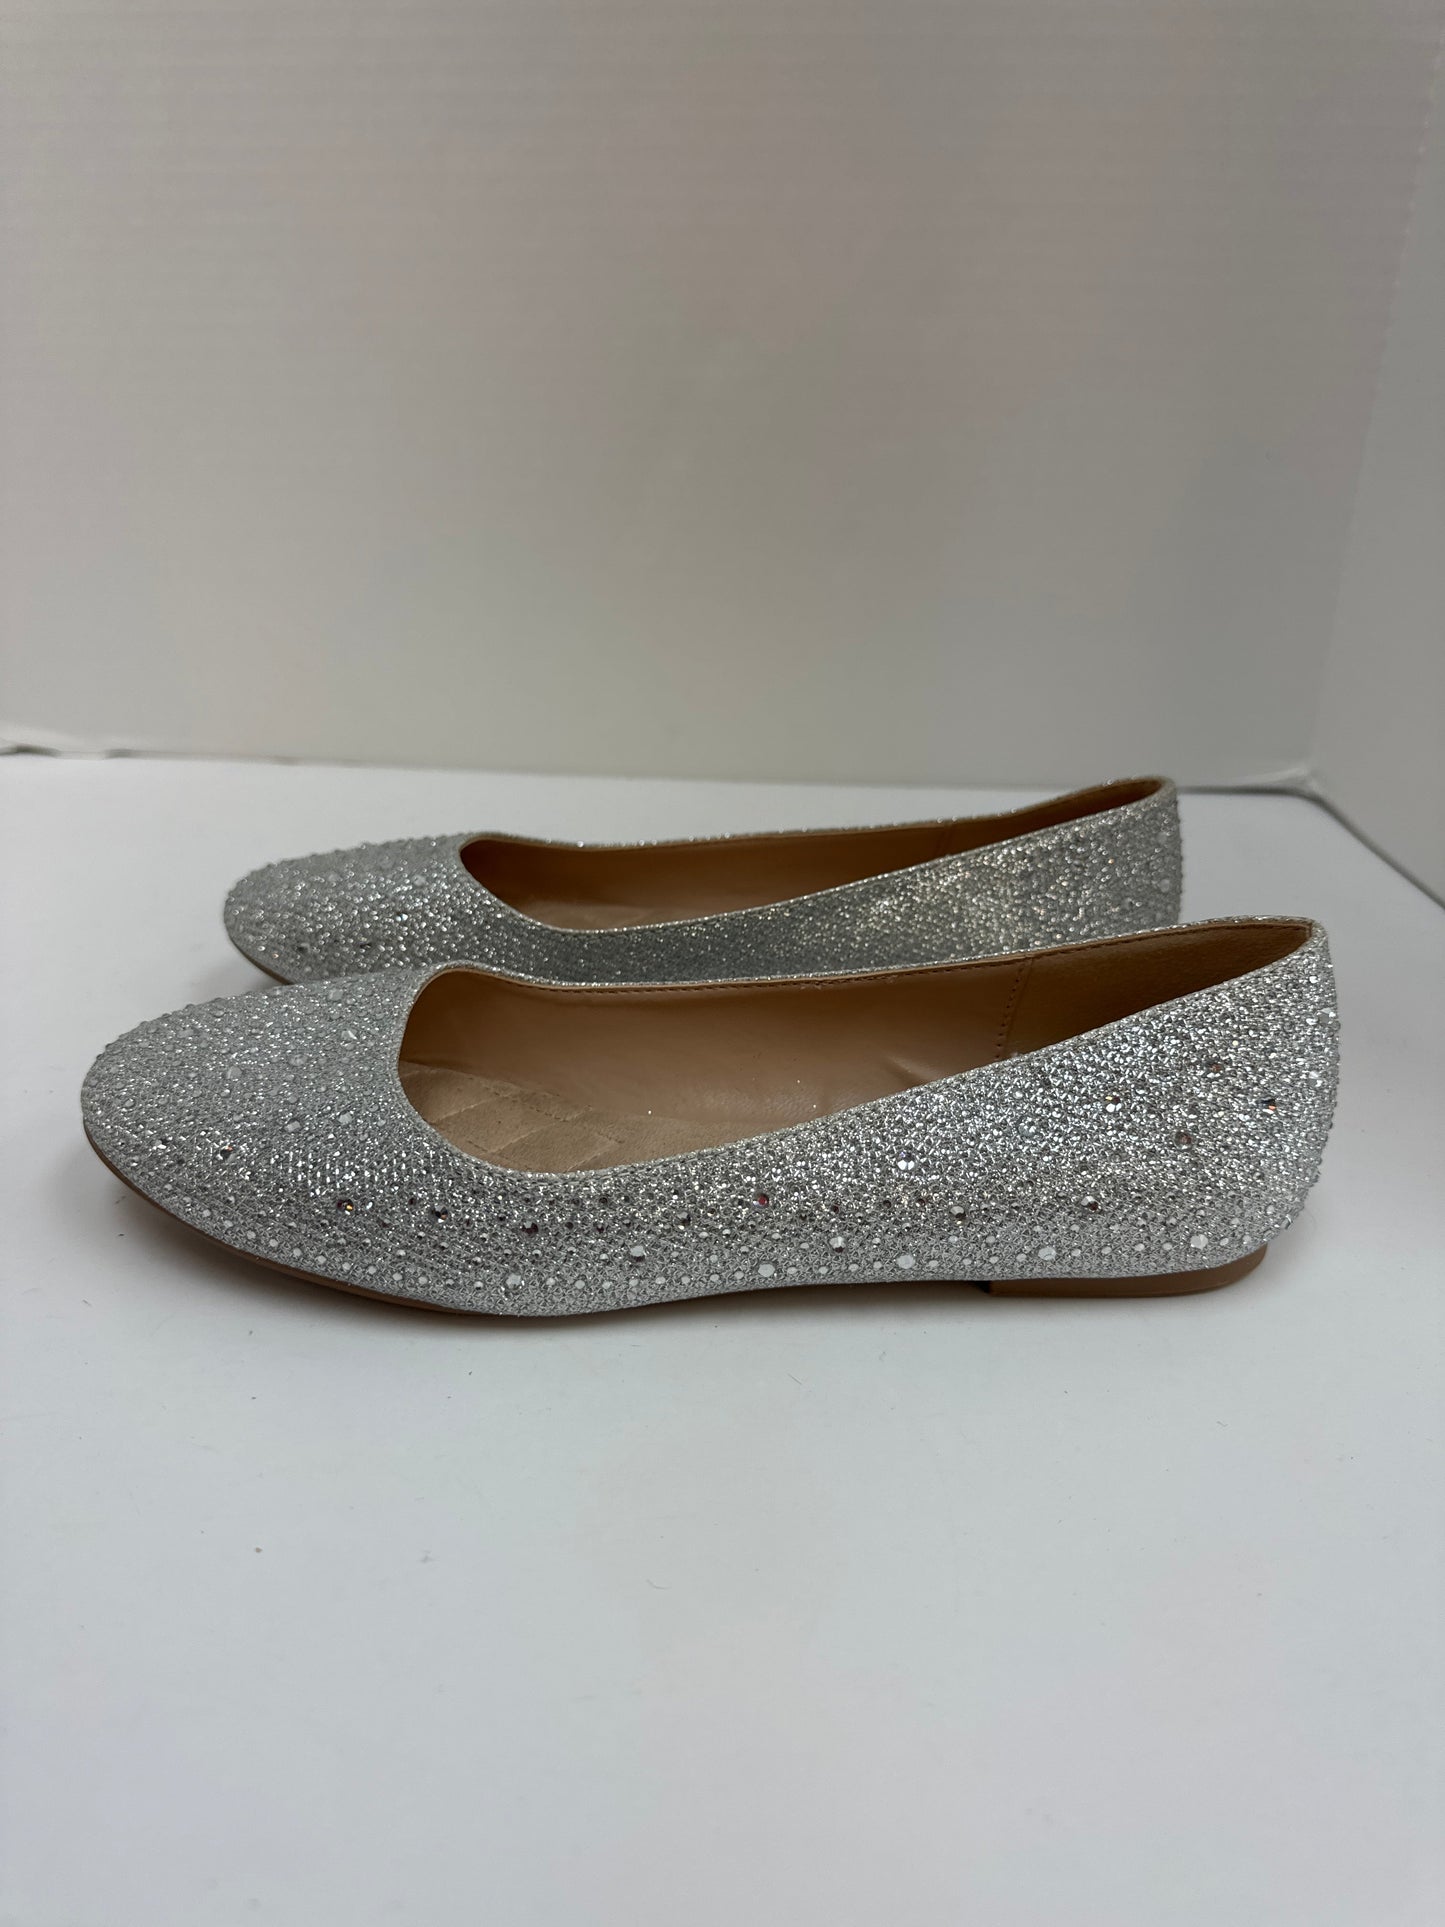 Shoes Flats By City Classified  Size: 7.5